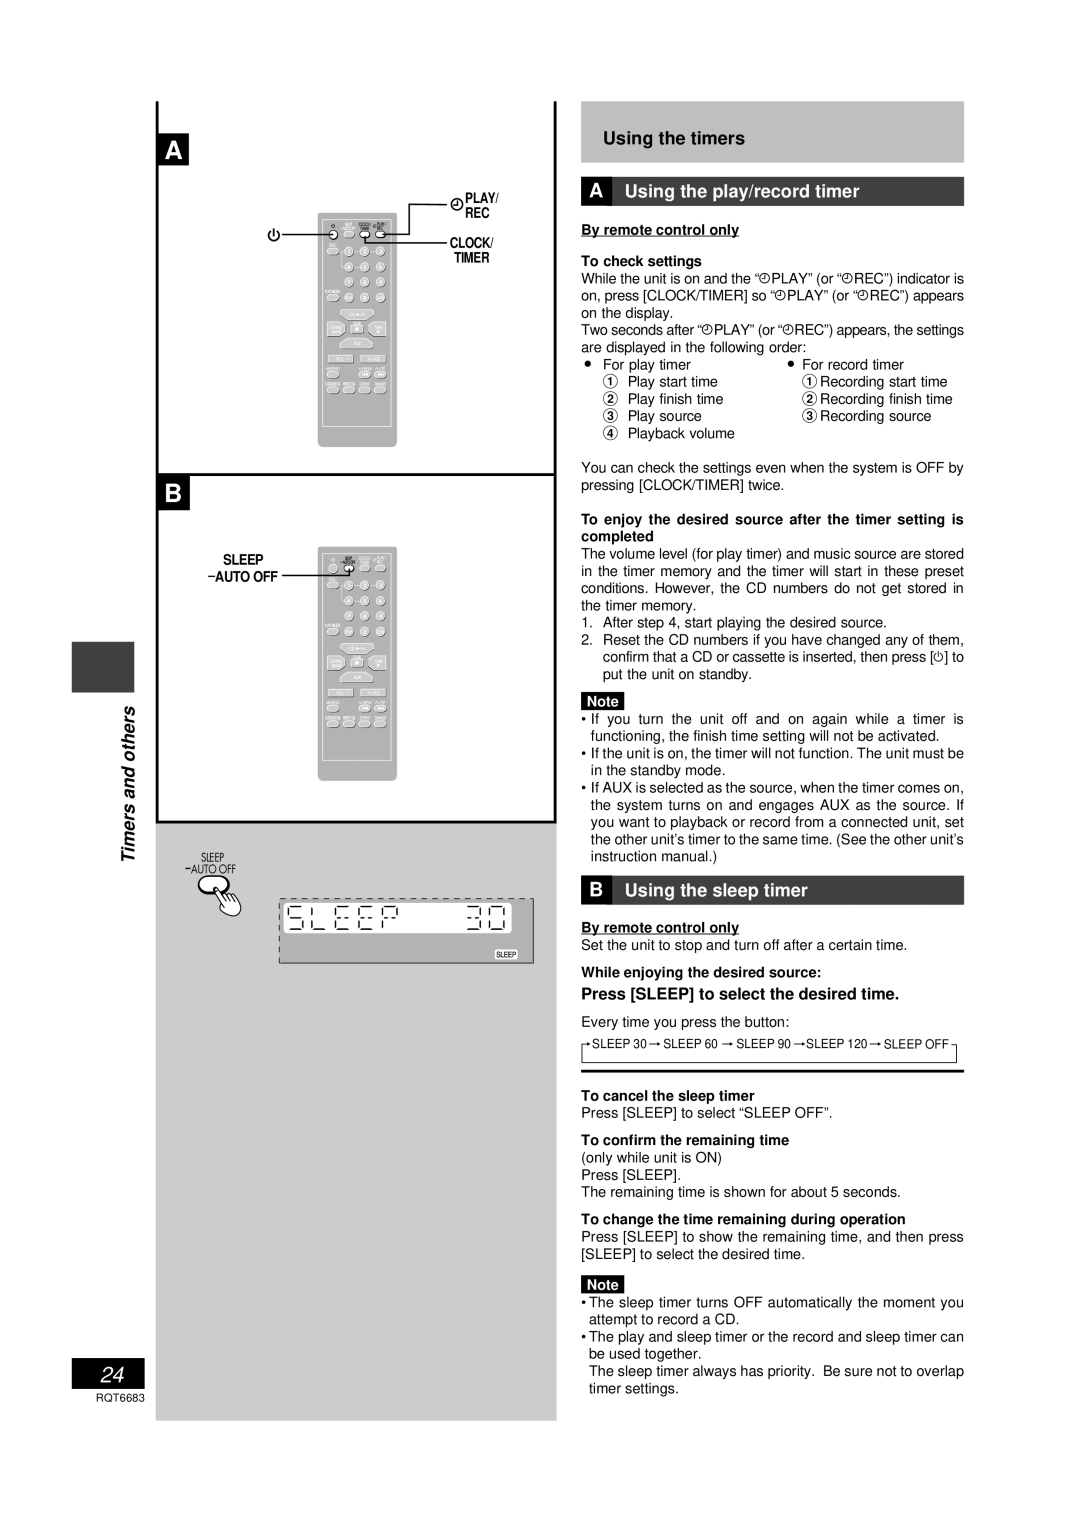 Panasonic SC-PM18 manual Using the timers, AUsing the play/record timer, BUsing the sleep timer, Play, Timers and others 